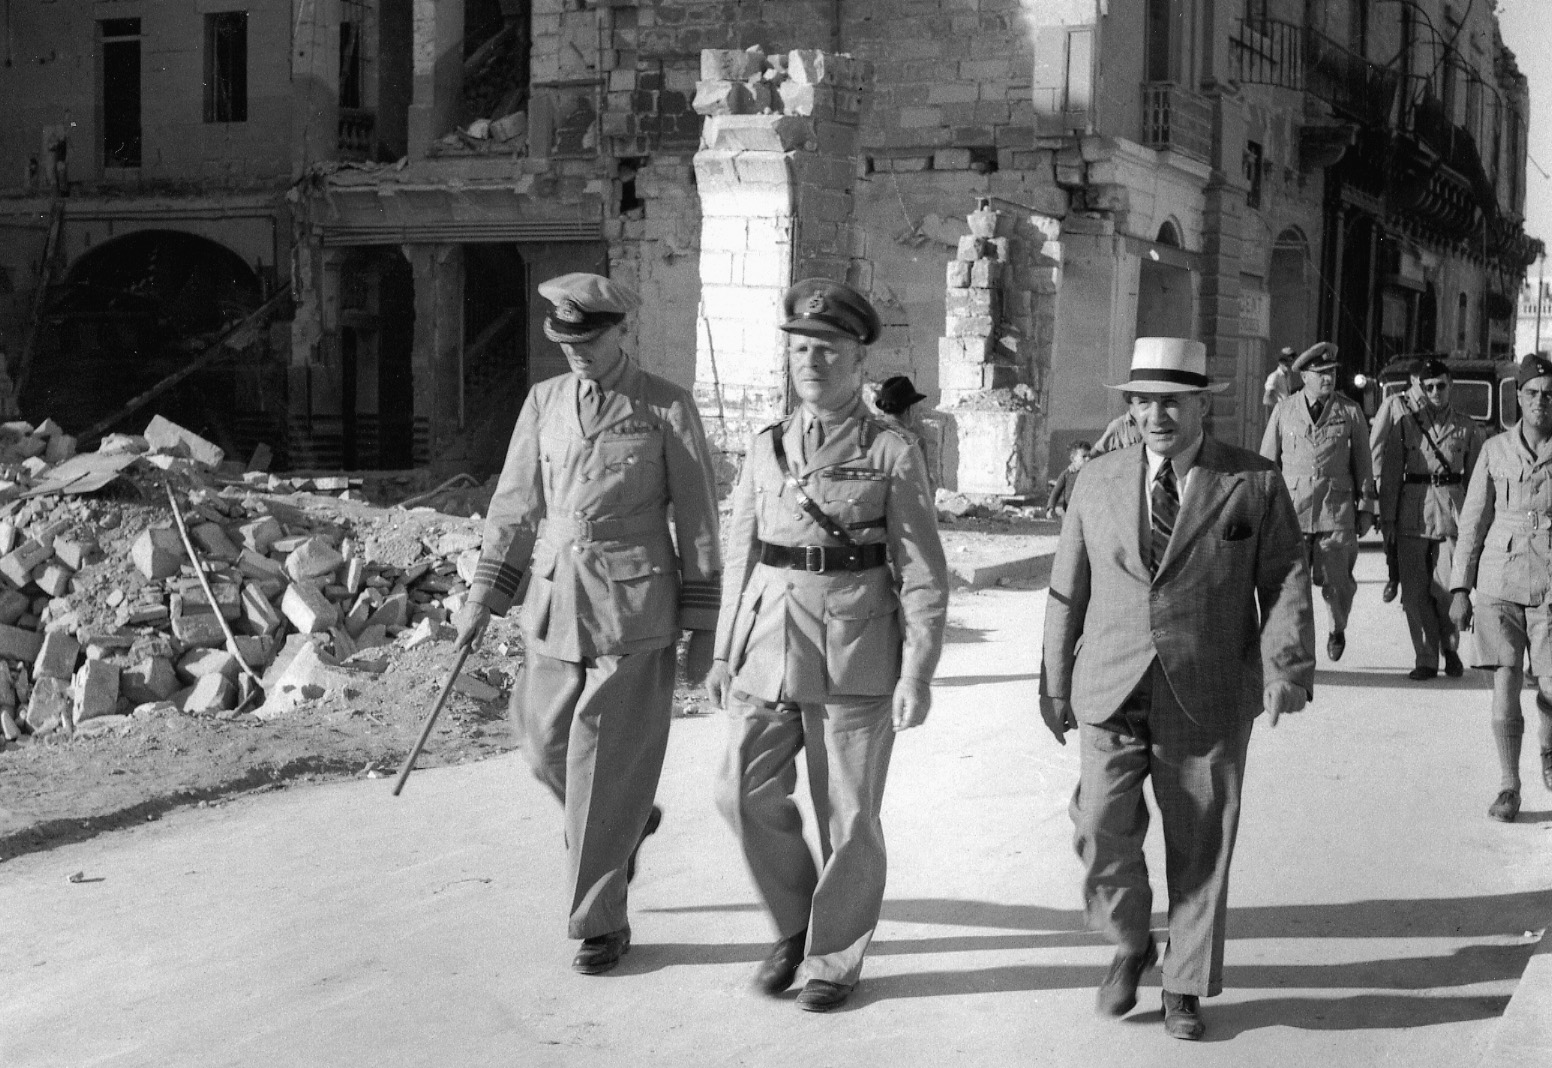 General Viscount Gort, Governor and Commander in Chief of Malta, tours bombed Valetta with members of his staff.